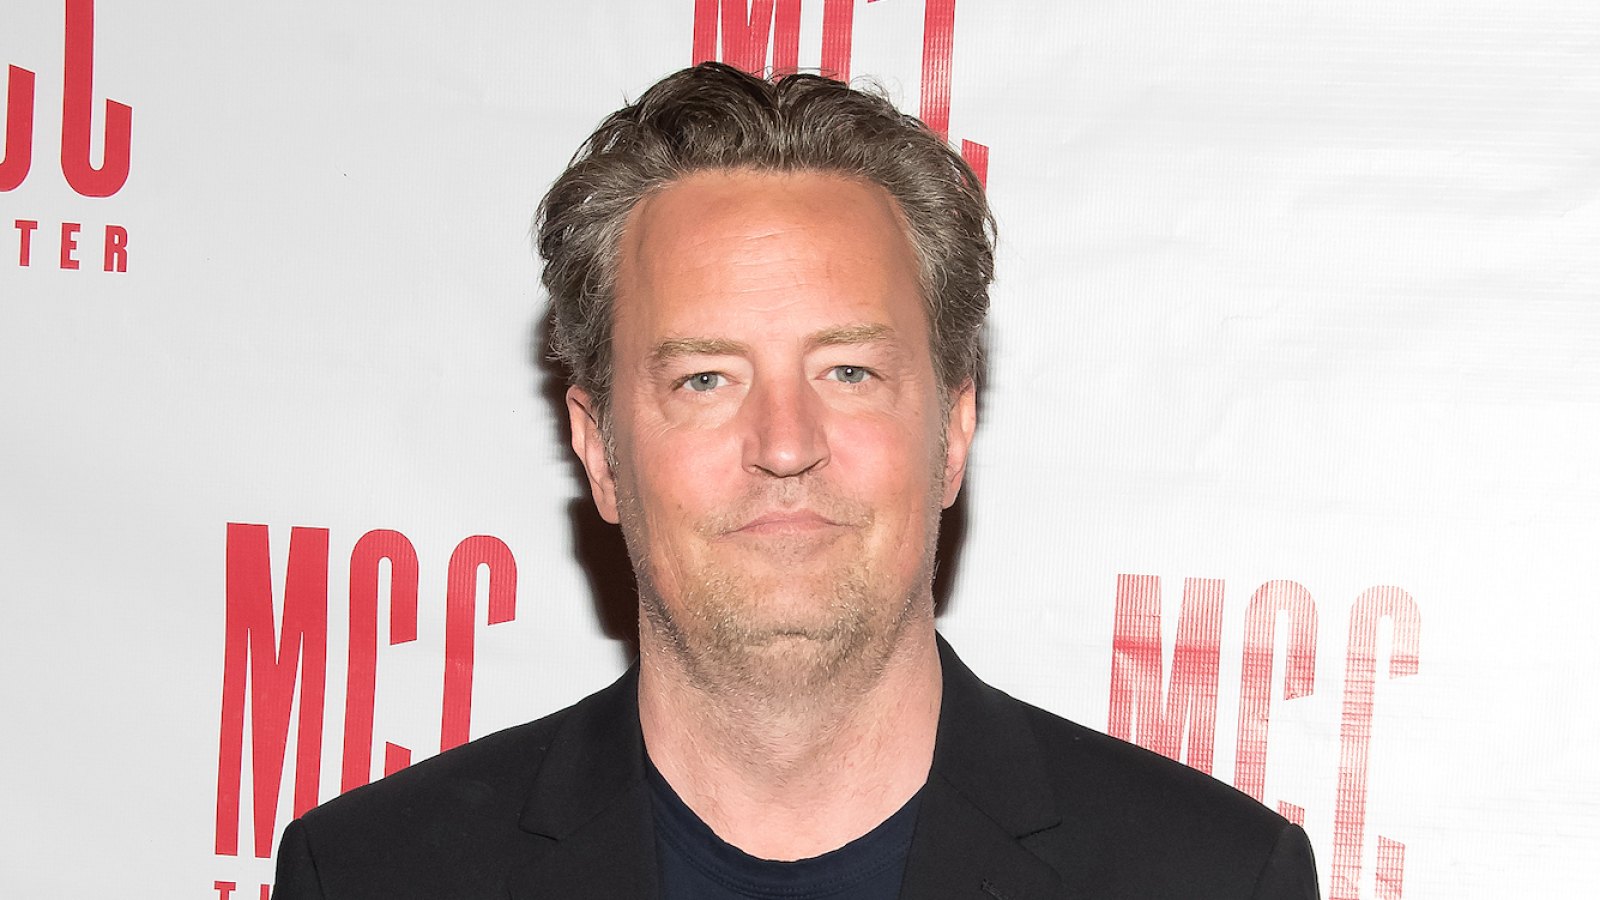 Matthew Perry s Friends Worried About a Drug Overdose Caused His Death Sources